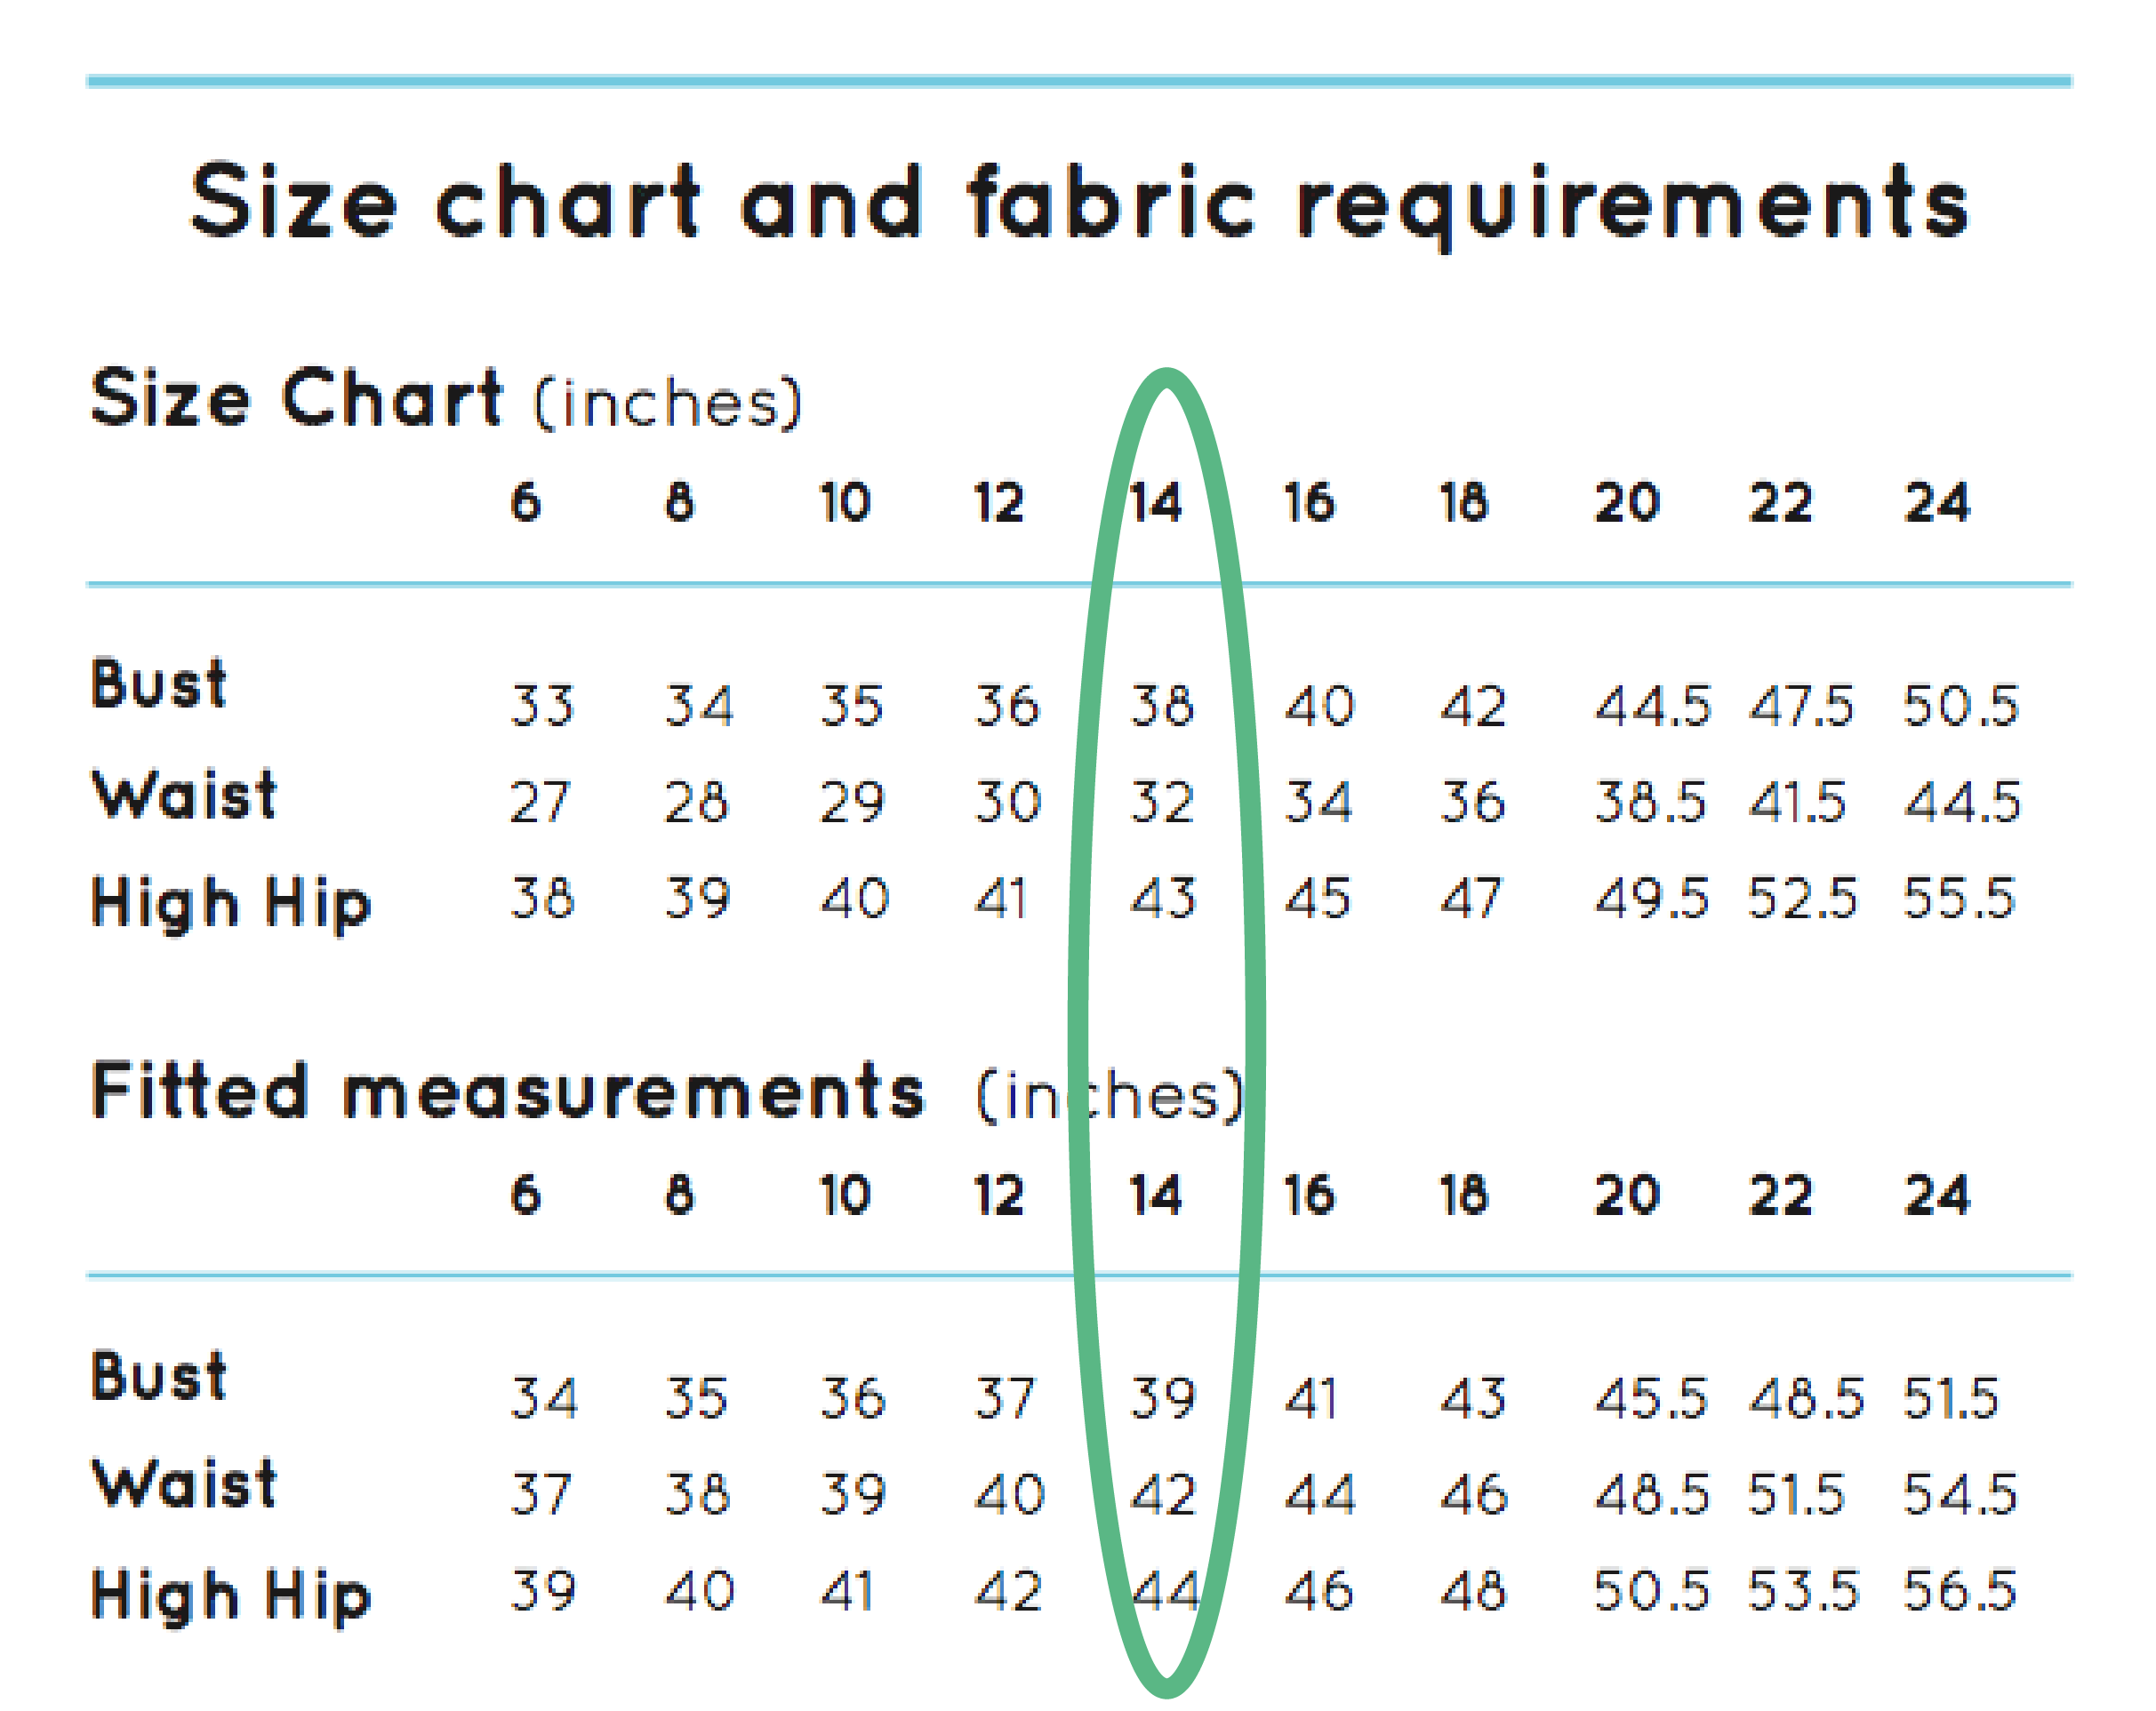 https://thefoldline.com/wp-content/uploads/2016/01/size-chart-and-fabric-requirements.png